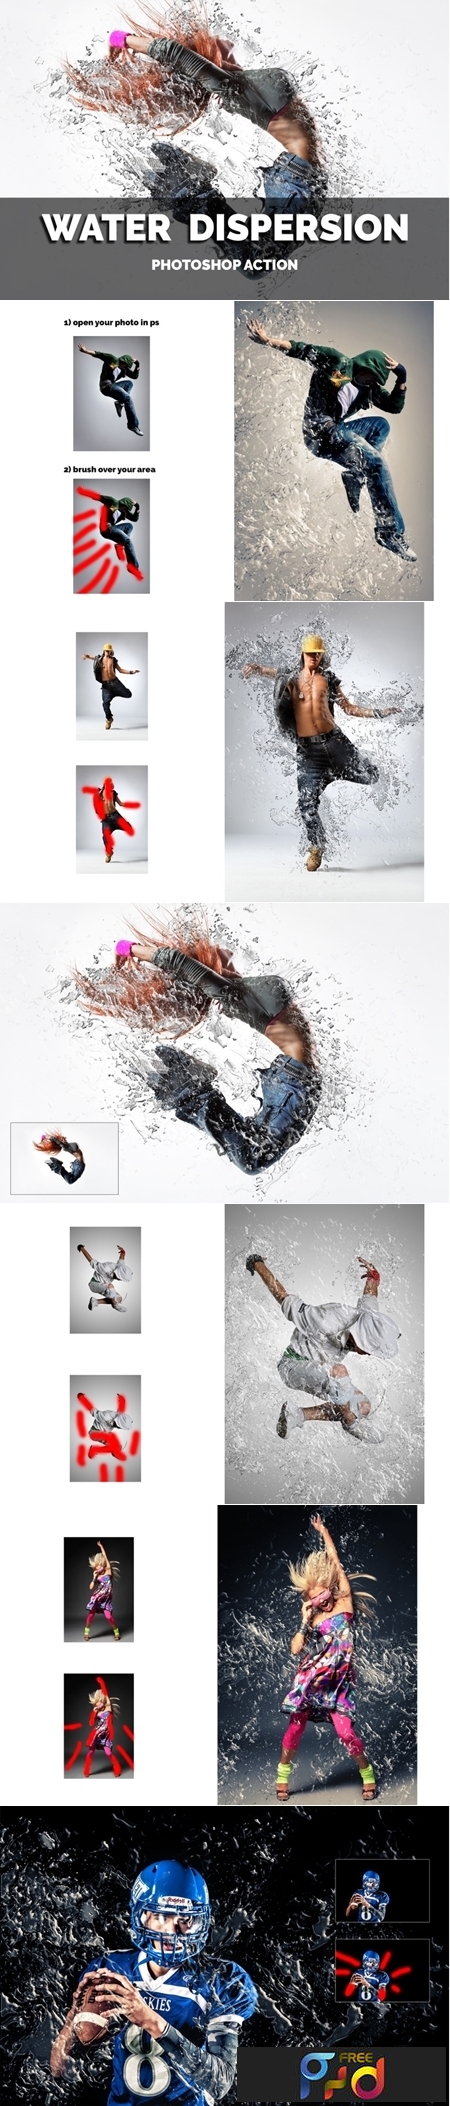 Water Dispersion Photoshop Action 3550100 1